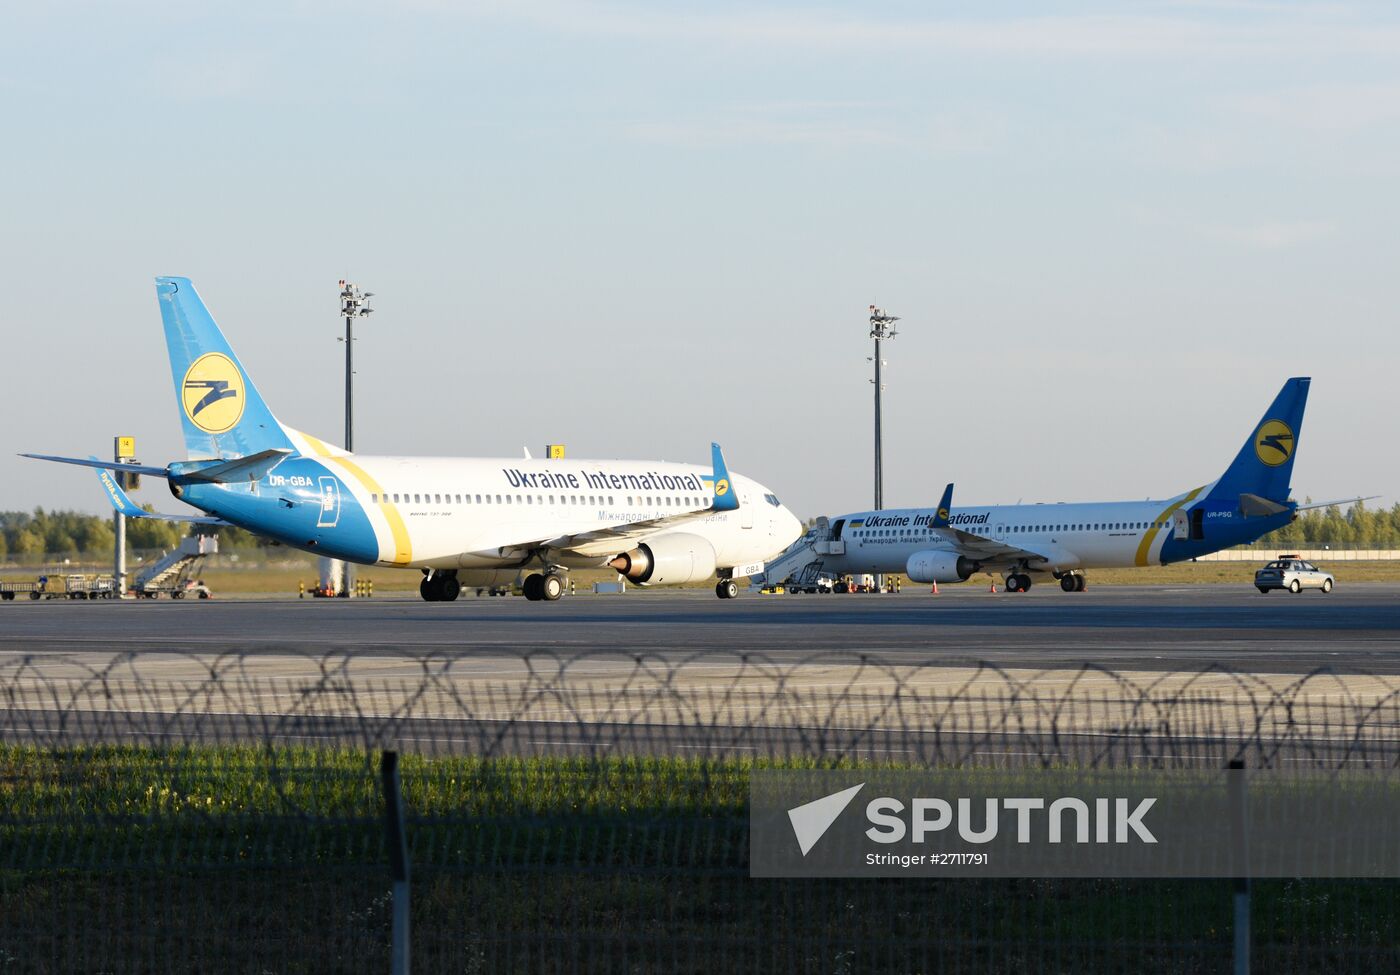 Russia, Ukraine's reciprocal air flight bans to take effect on October 25